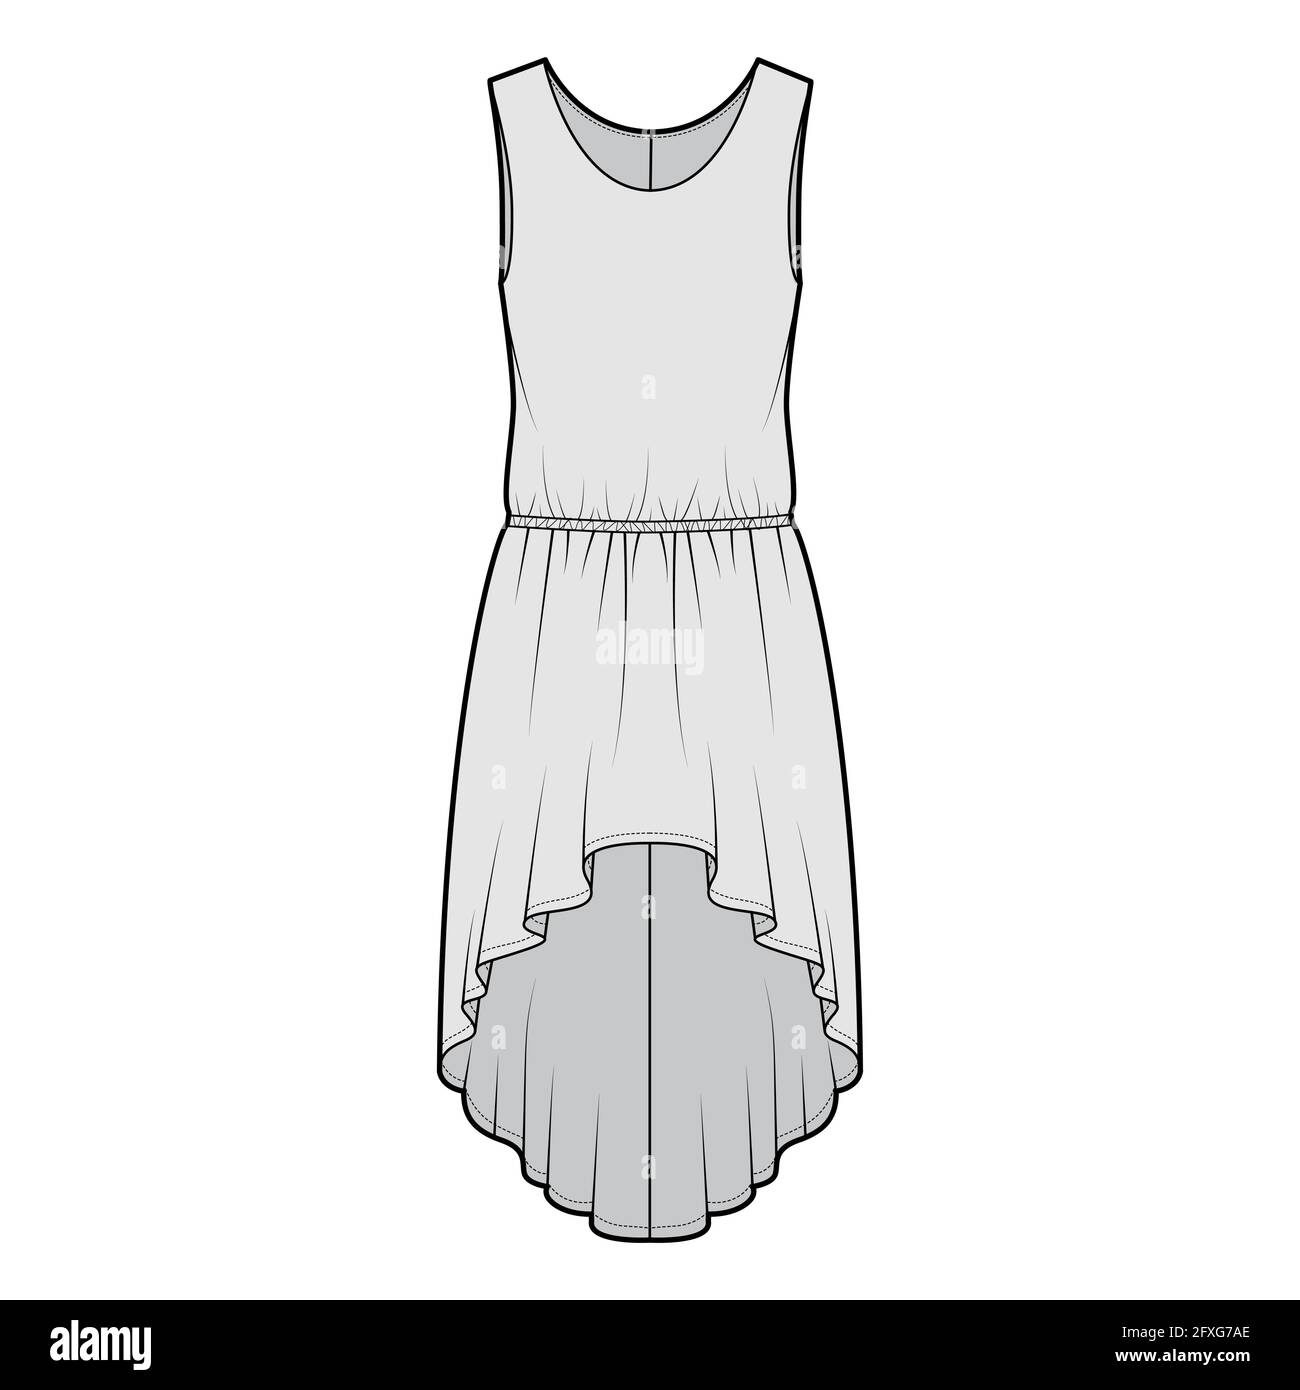 Dress high-low technical fashion illustration with sleeveless, oversized body, dropped elastic waistline, circular skirt. Flat apparel front, grey color style. Women, men unisex CAD mockup Stock Vector